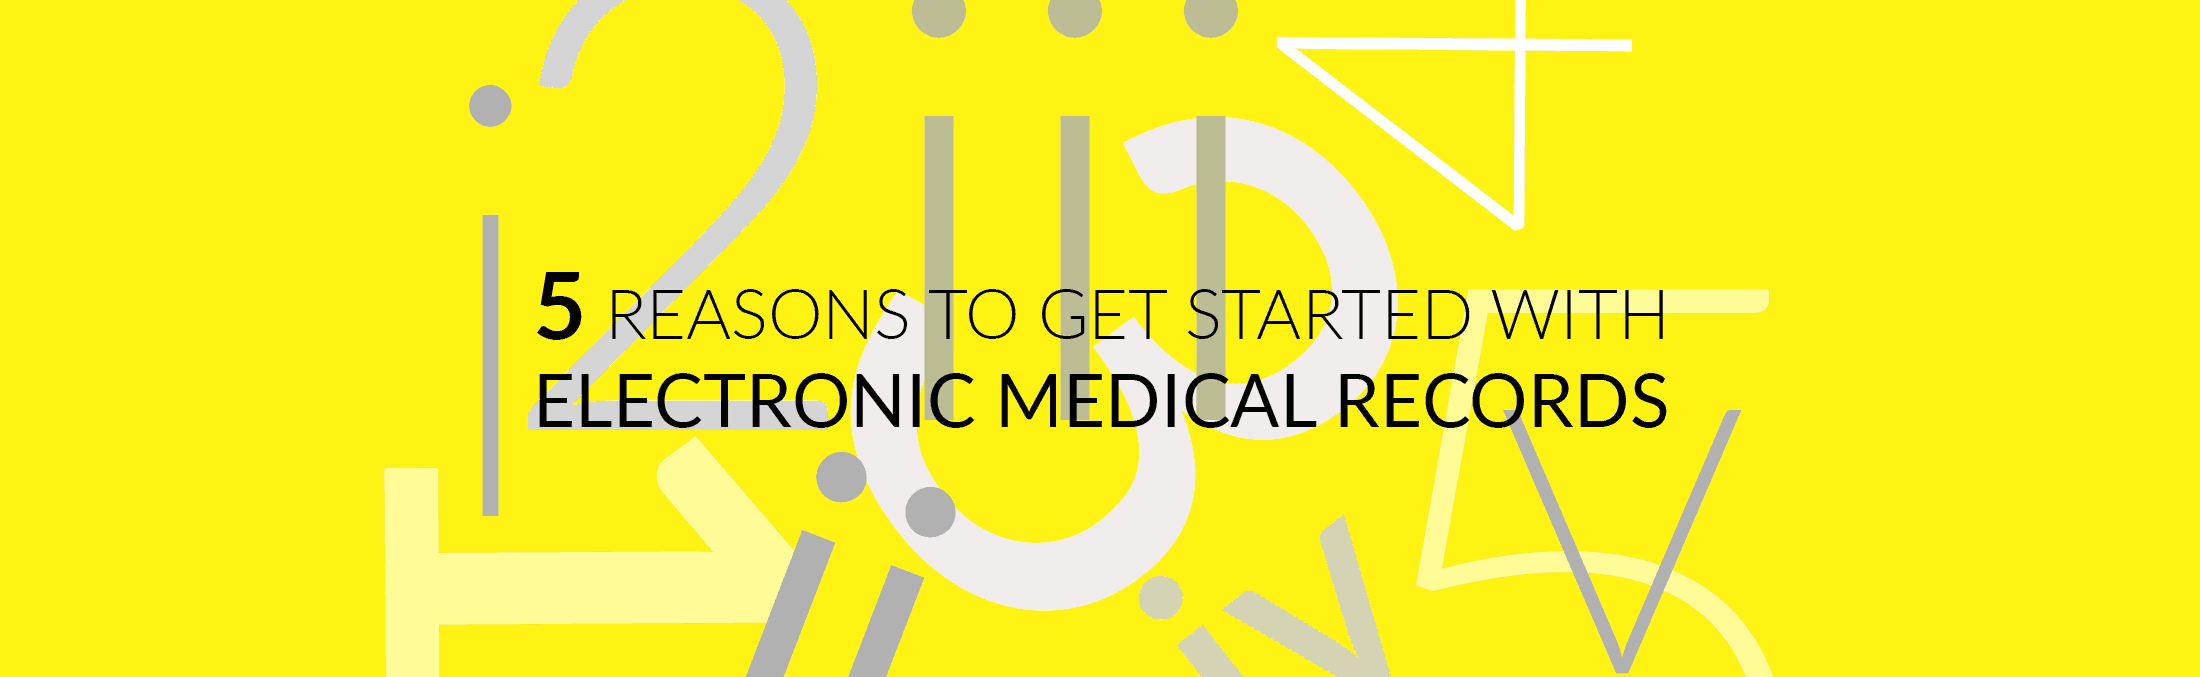 reasons to get started with emrs banner